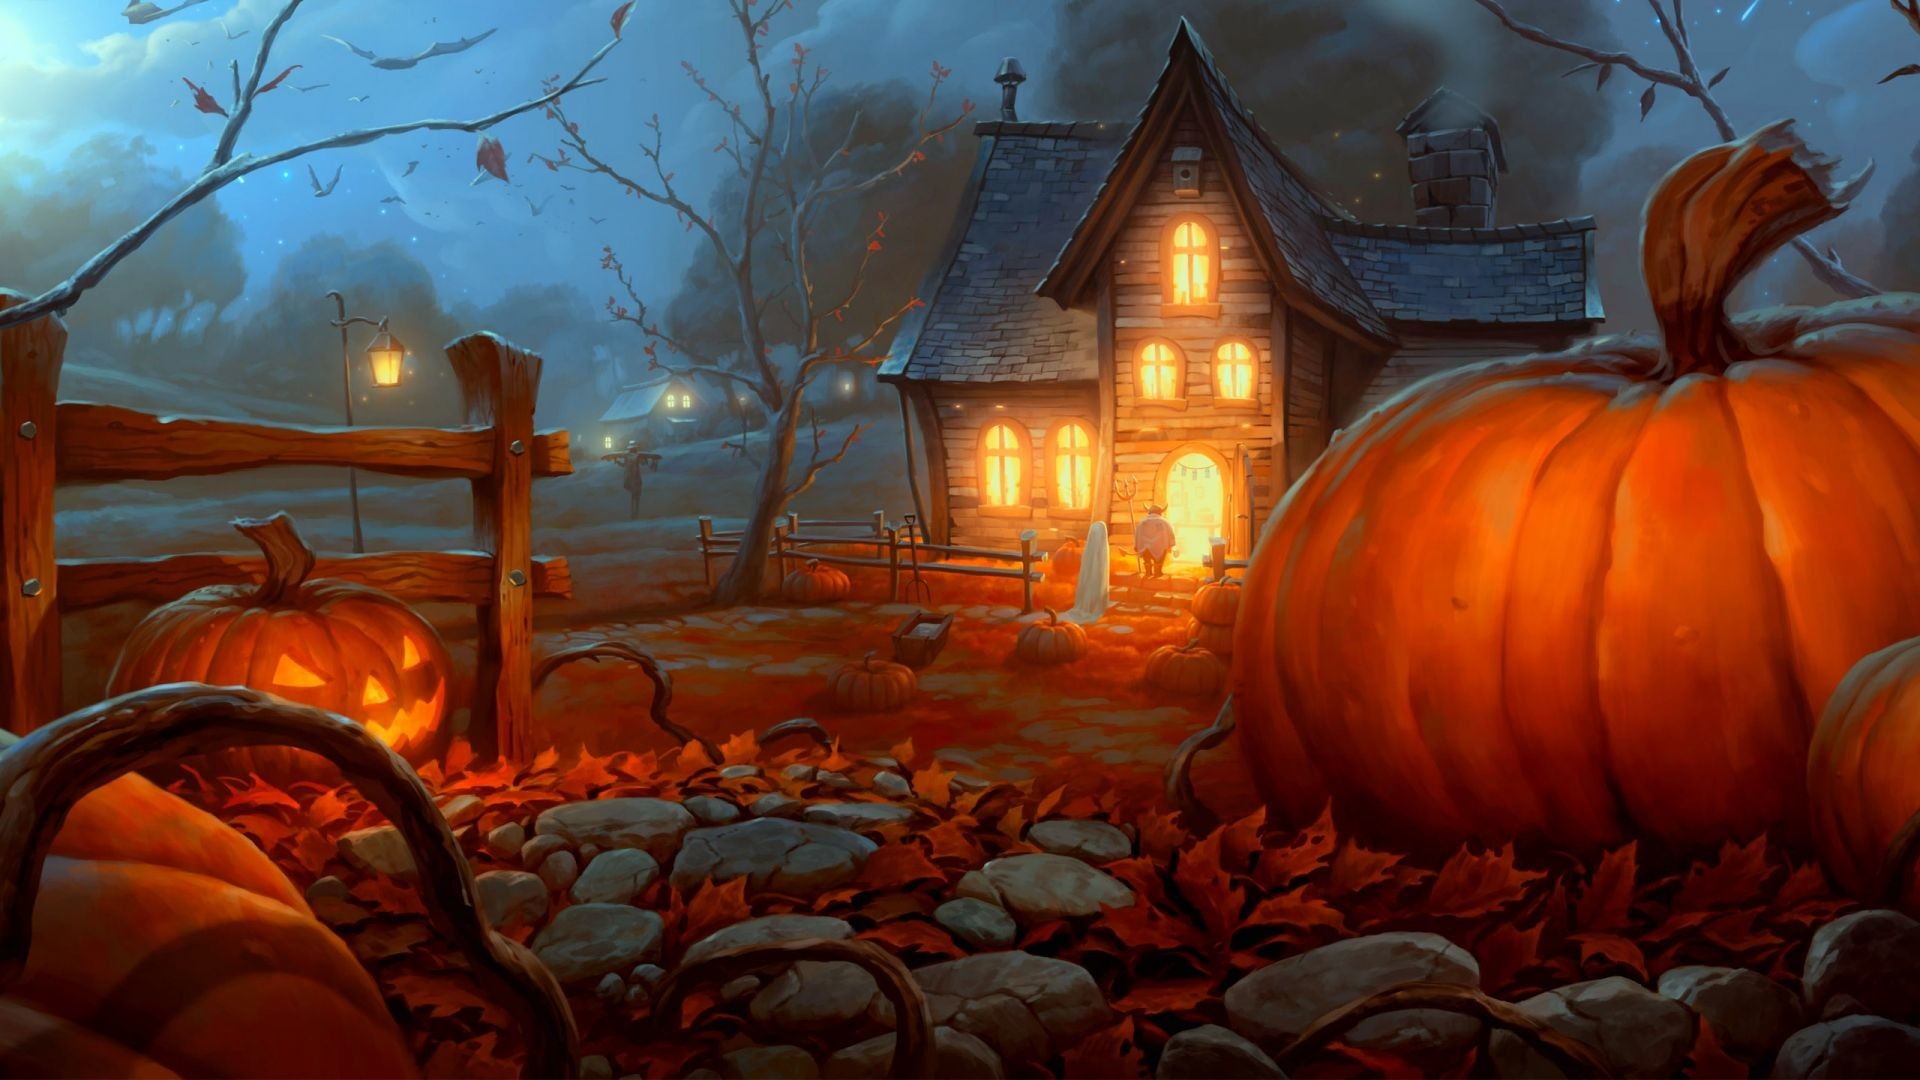 Scary Halloween Wallpaper And Screensavers Image